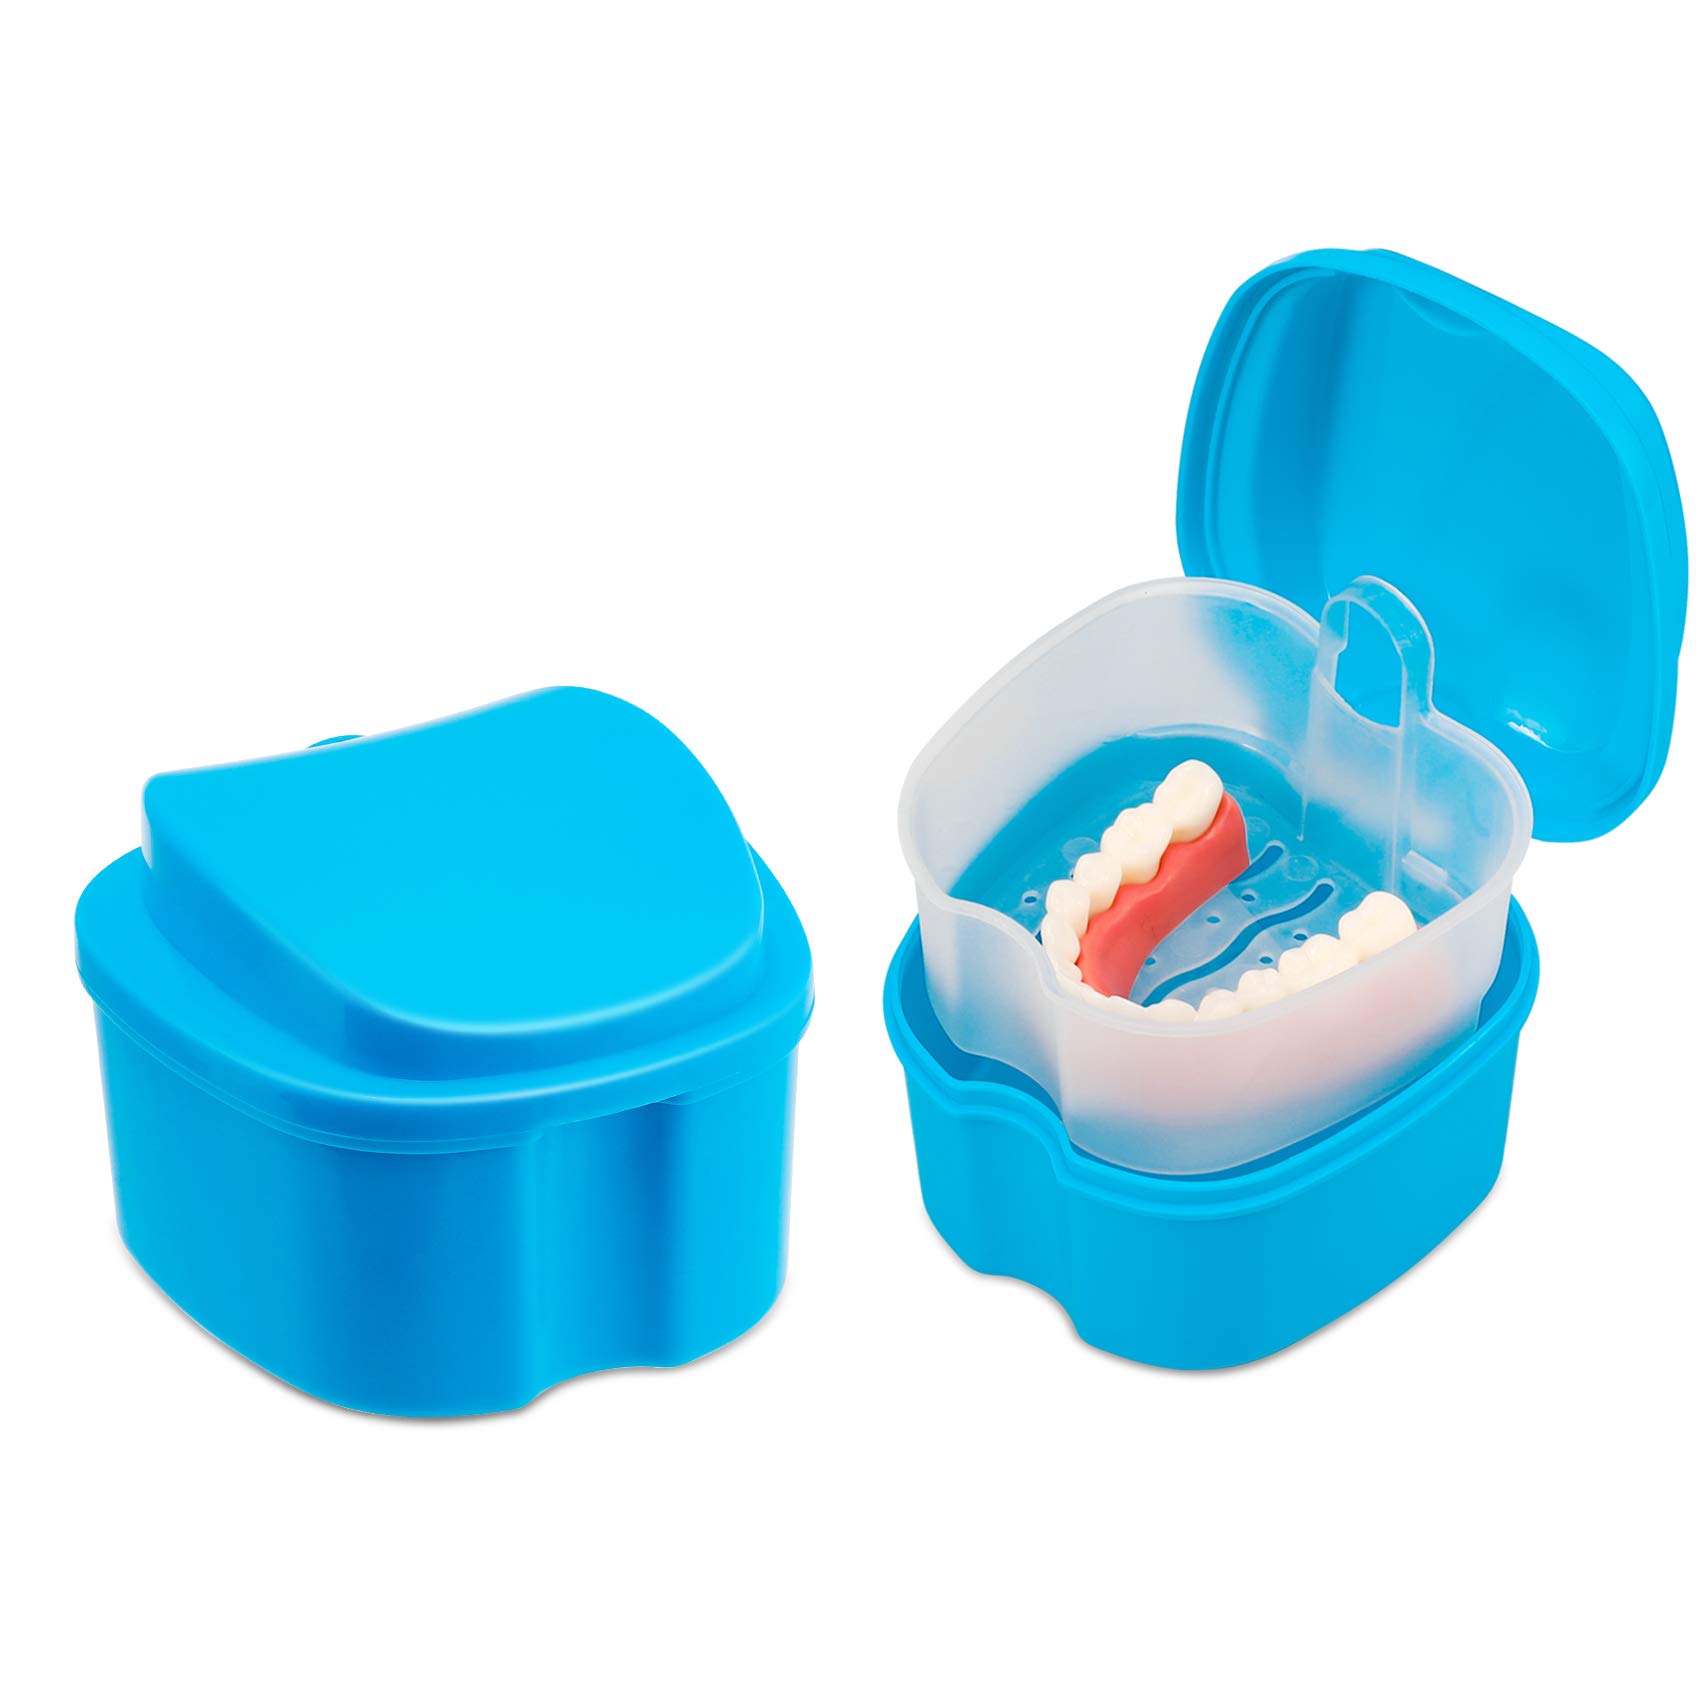 Dental Orthodontic Retainer Case Cleaning with Strainer Basket